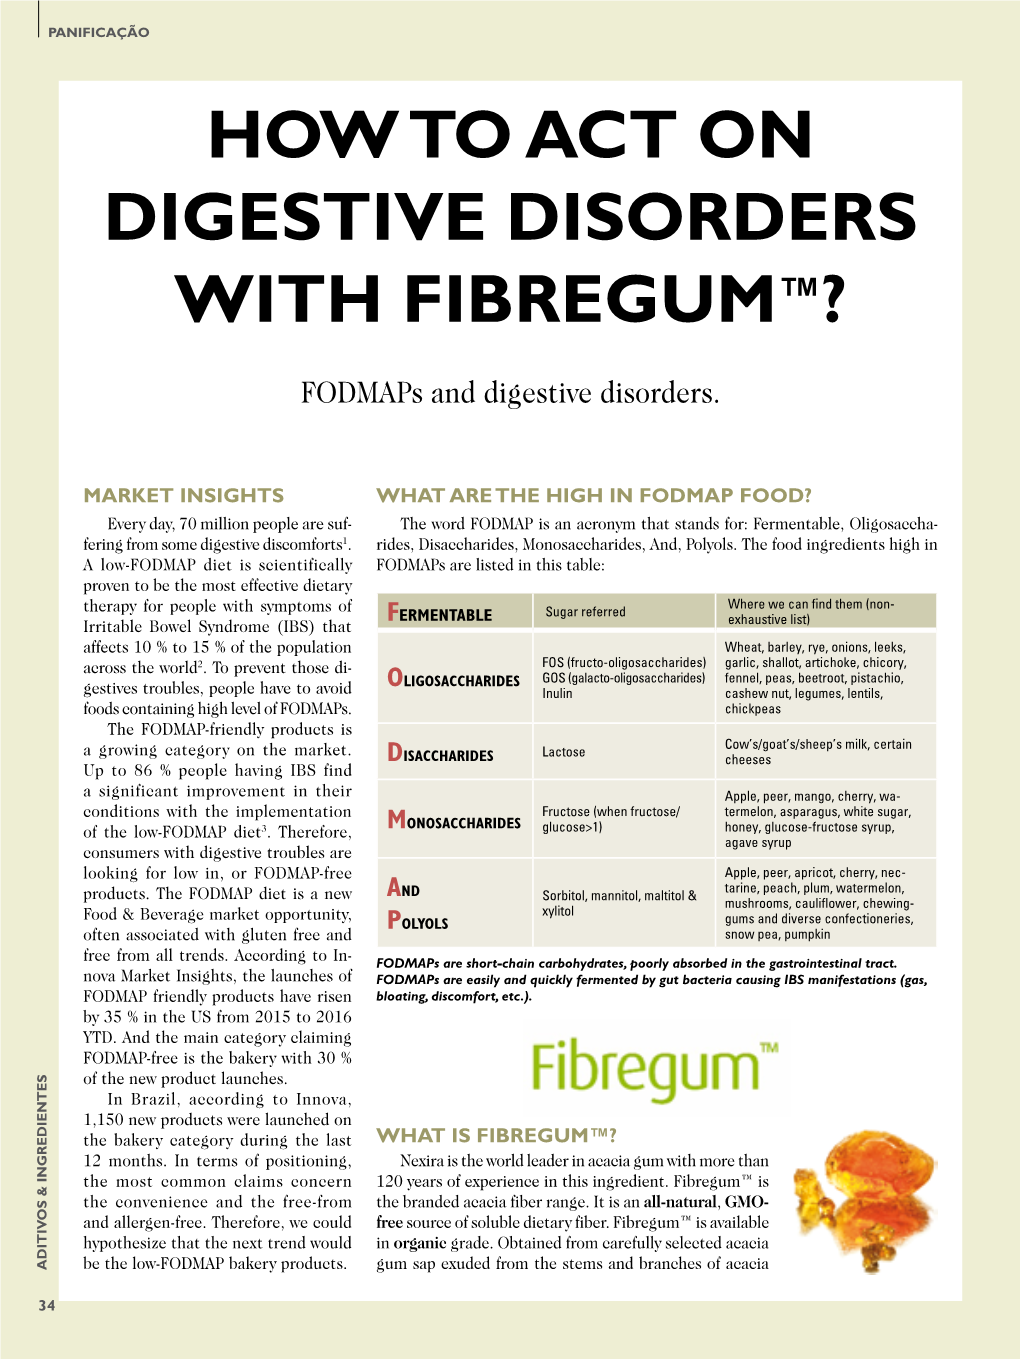 How to Act on Digestive Disorders with Fibregum™?